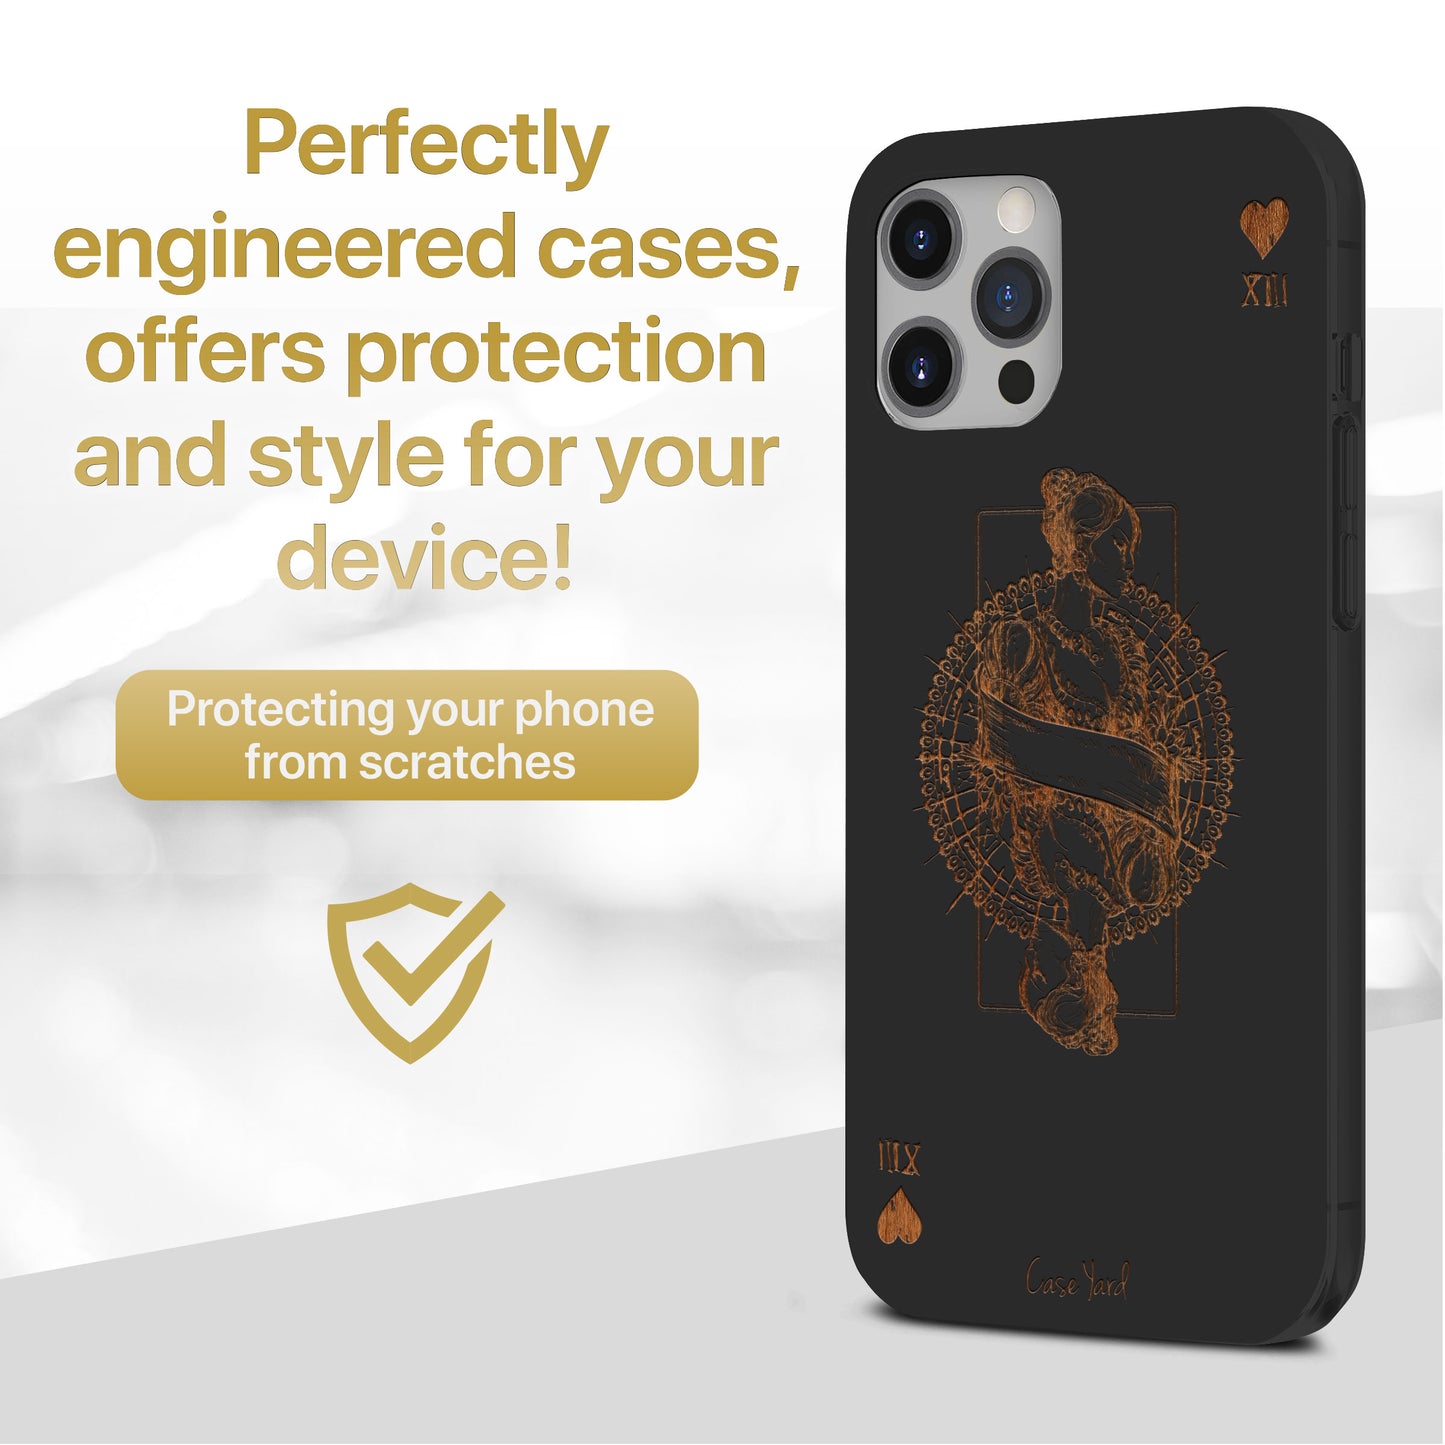 Wooden Cell Phone Case Cover, Laser Engraved case for iPhone & Samsung phone Queen of Hearts Design